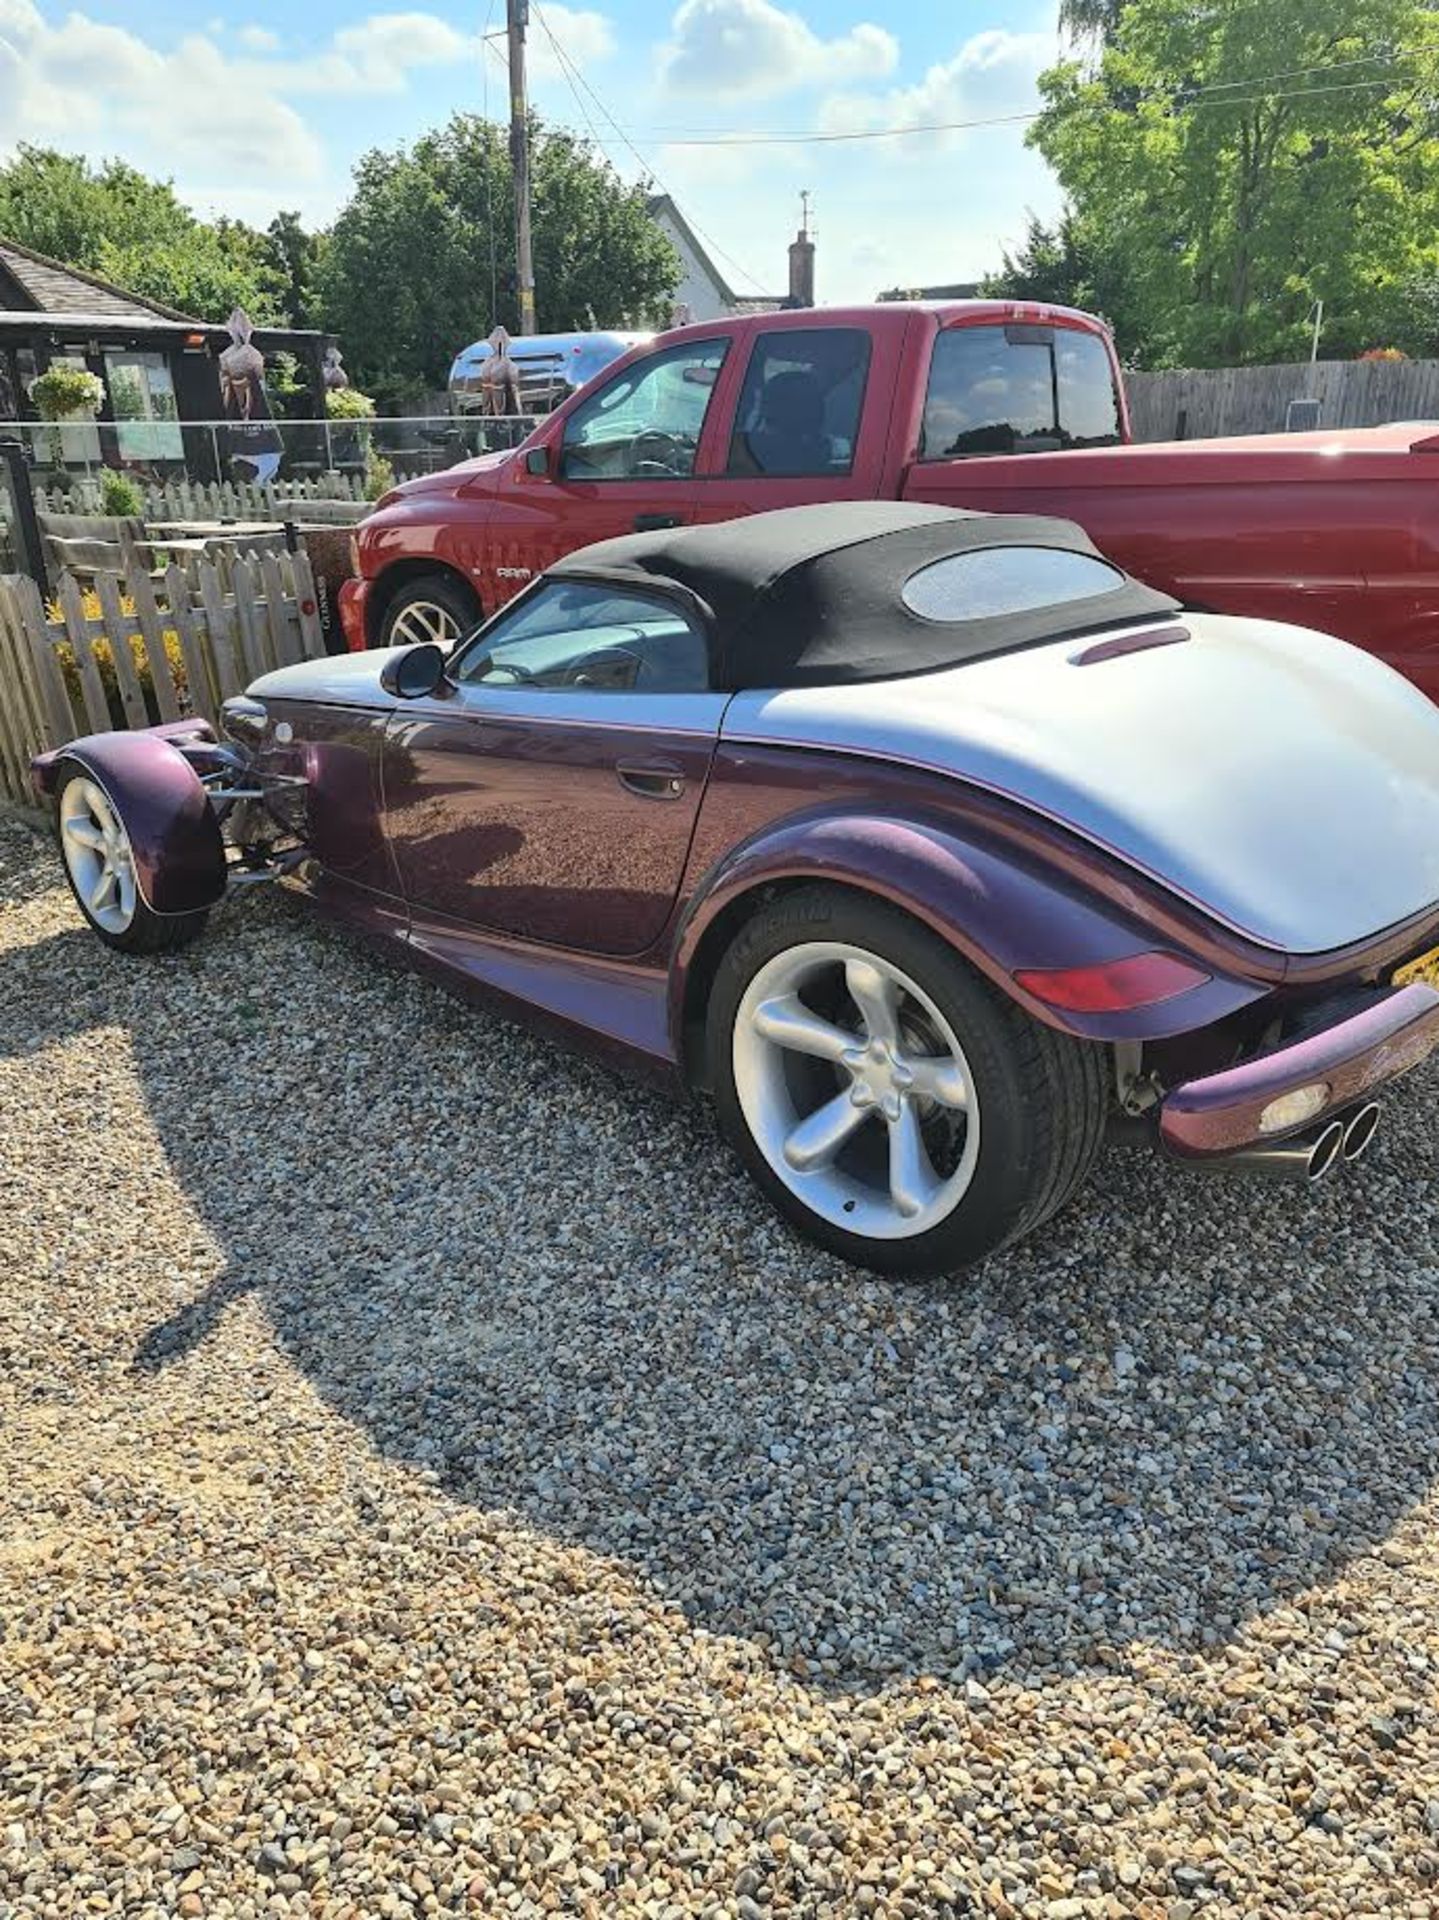 1998 CHRYSLER PLYMOUTH PROWLER V6 2 DOOR CONVERTIBLE, 3500cc PETROL ENGINE, AUTO *NO VAT* - Image 30 of 32